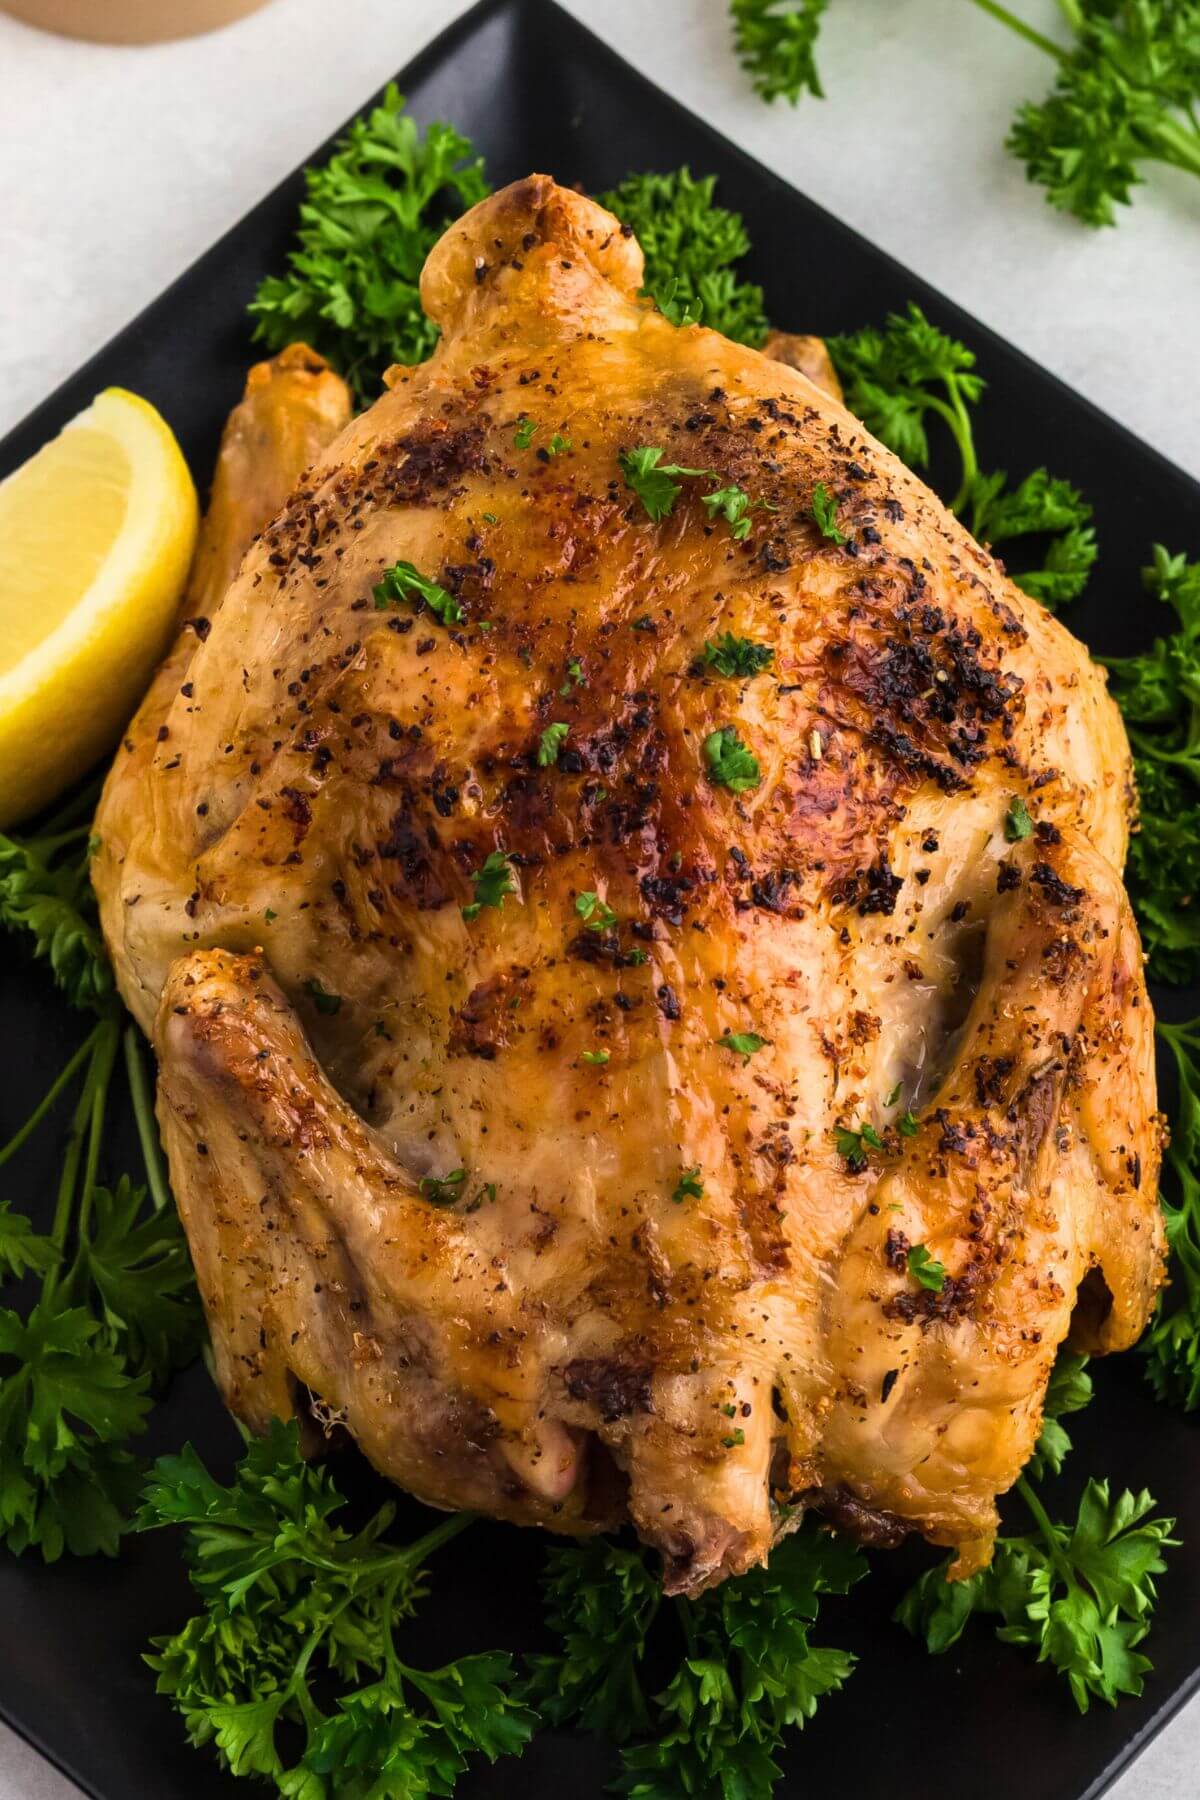 Juicy golden brown Cornish hen seasoned and served on a black plate then garnished with parsley and lemon wedges. 